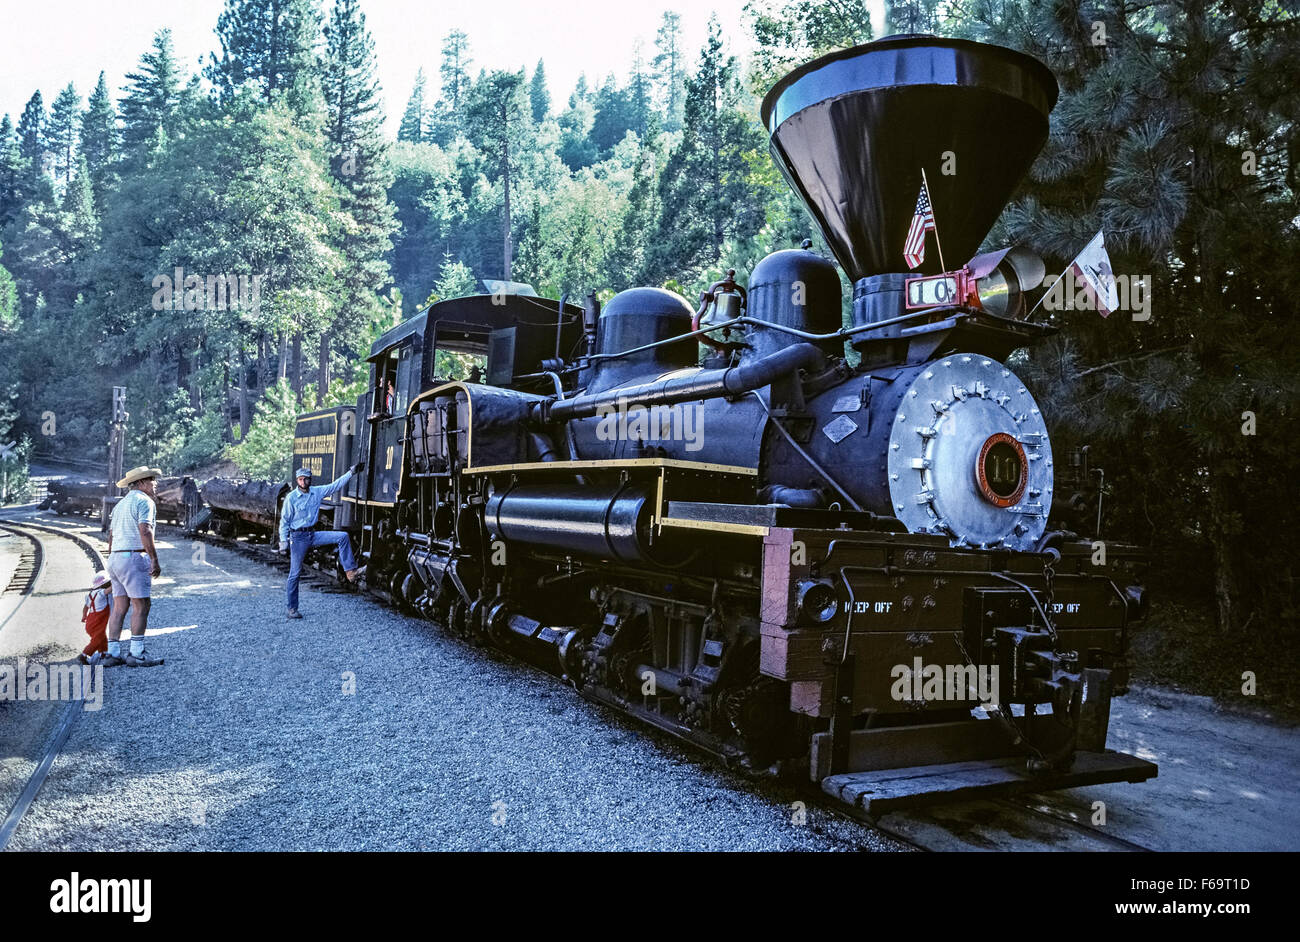 Visitors can experience bygone days in the Sierra National Forest by riding a logging train pulled by an historic steam locomotive operated by the Yosemite Mountain Sugar Pine Railroad from Fish Camp in California, USA. This Shay engine No. 10 was built in 1928 in Lima, Ohio, weighs 84 tons, and makes four-mile, hour-long excursions March through October. Stock Photo